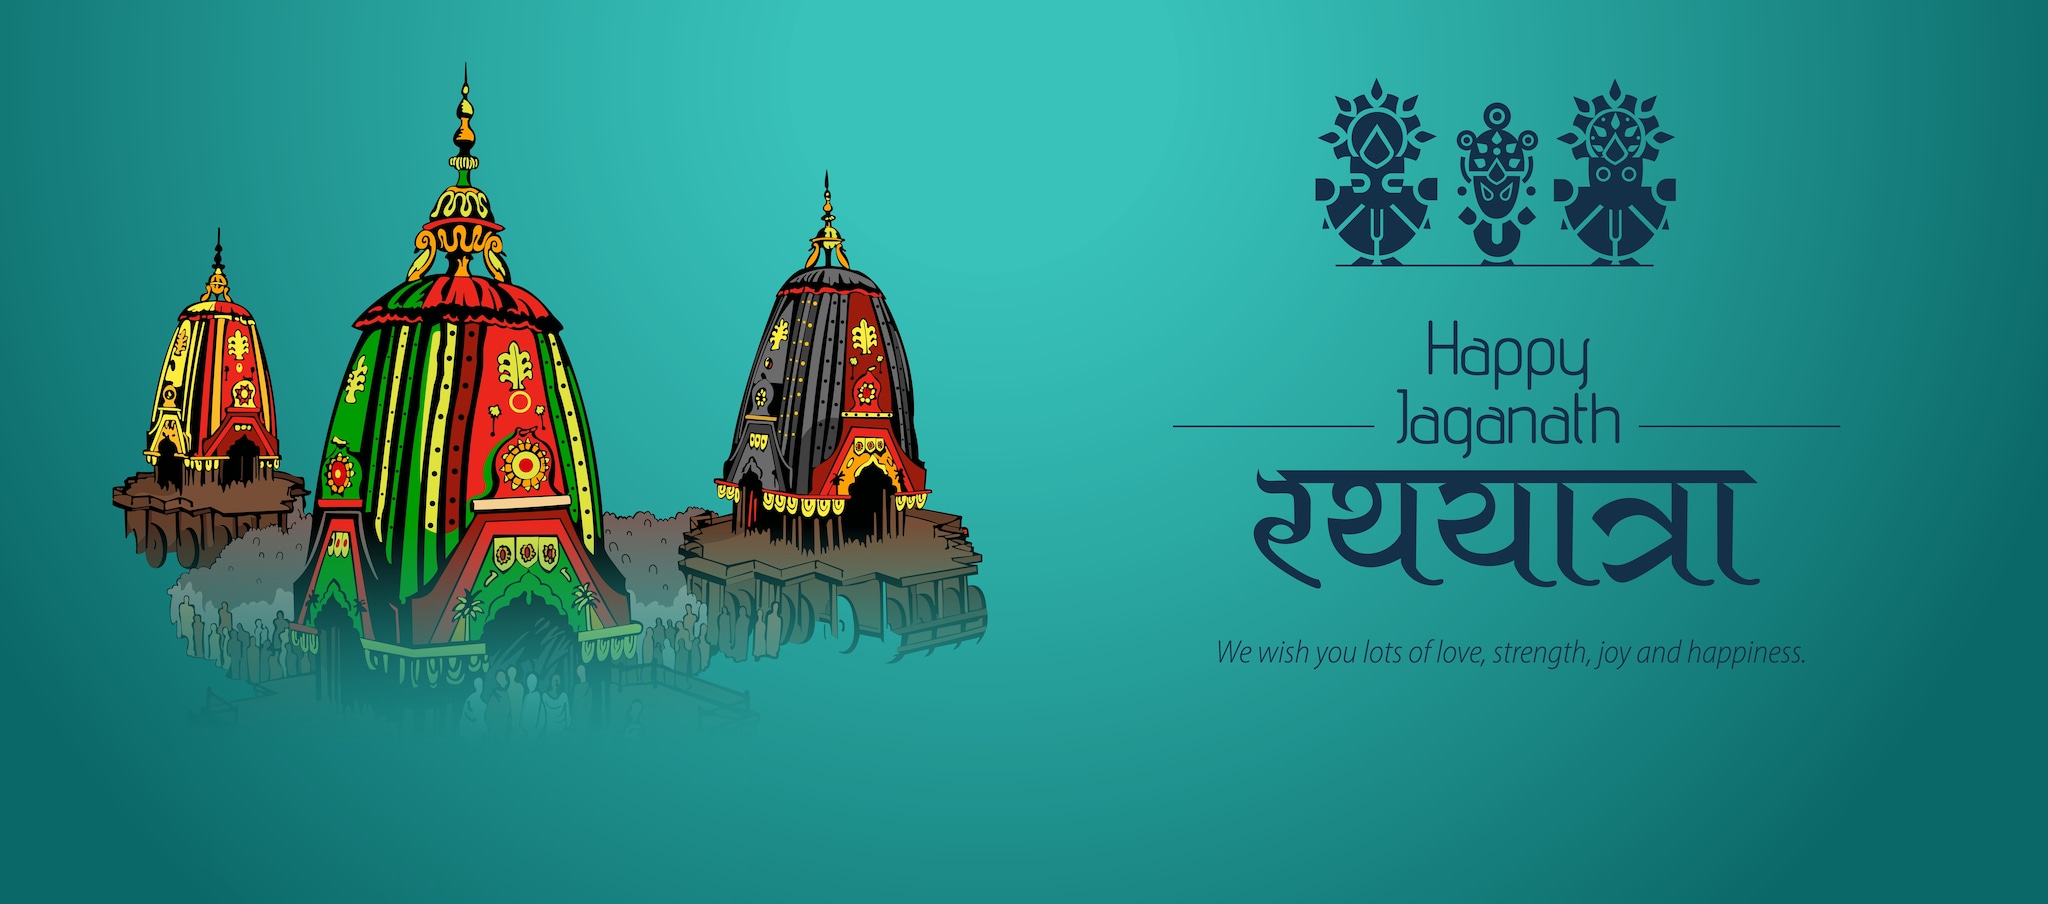 Happy Jagannath Rath Yatra 2022: Wishes Images, Quotes, Photos, Photos, Facebook SMS and Messages to share with your loved ones. (Image: Shutterstock)